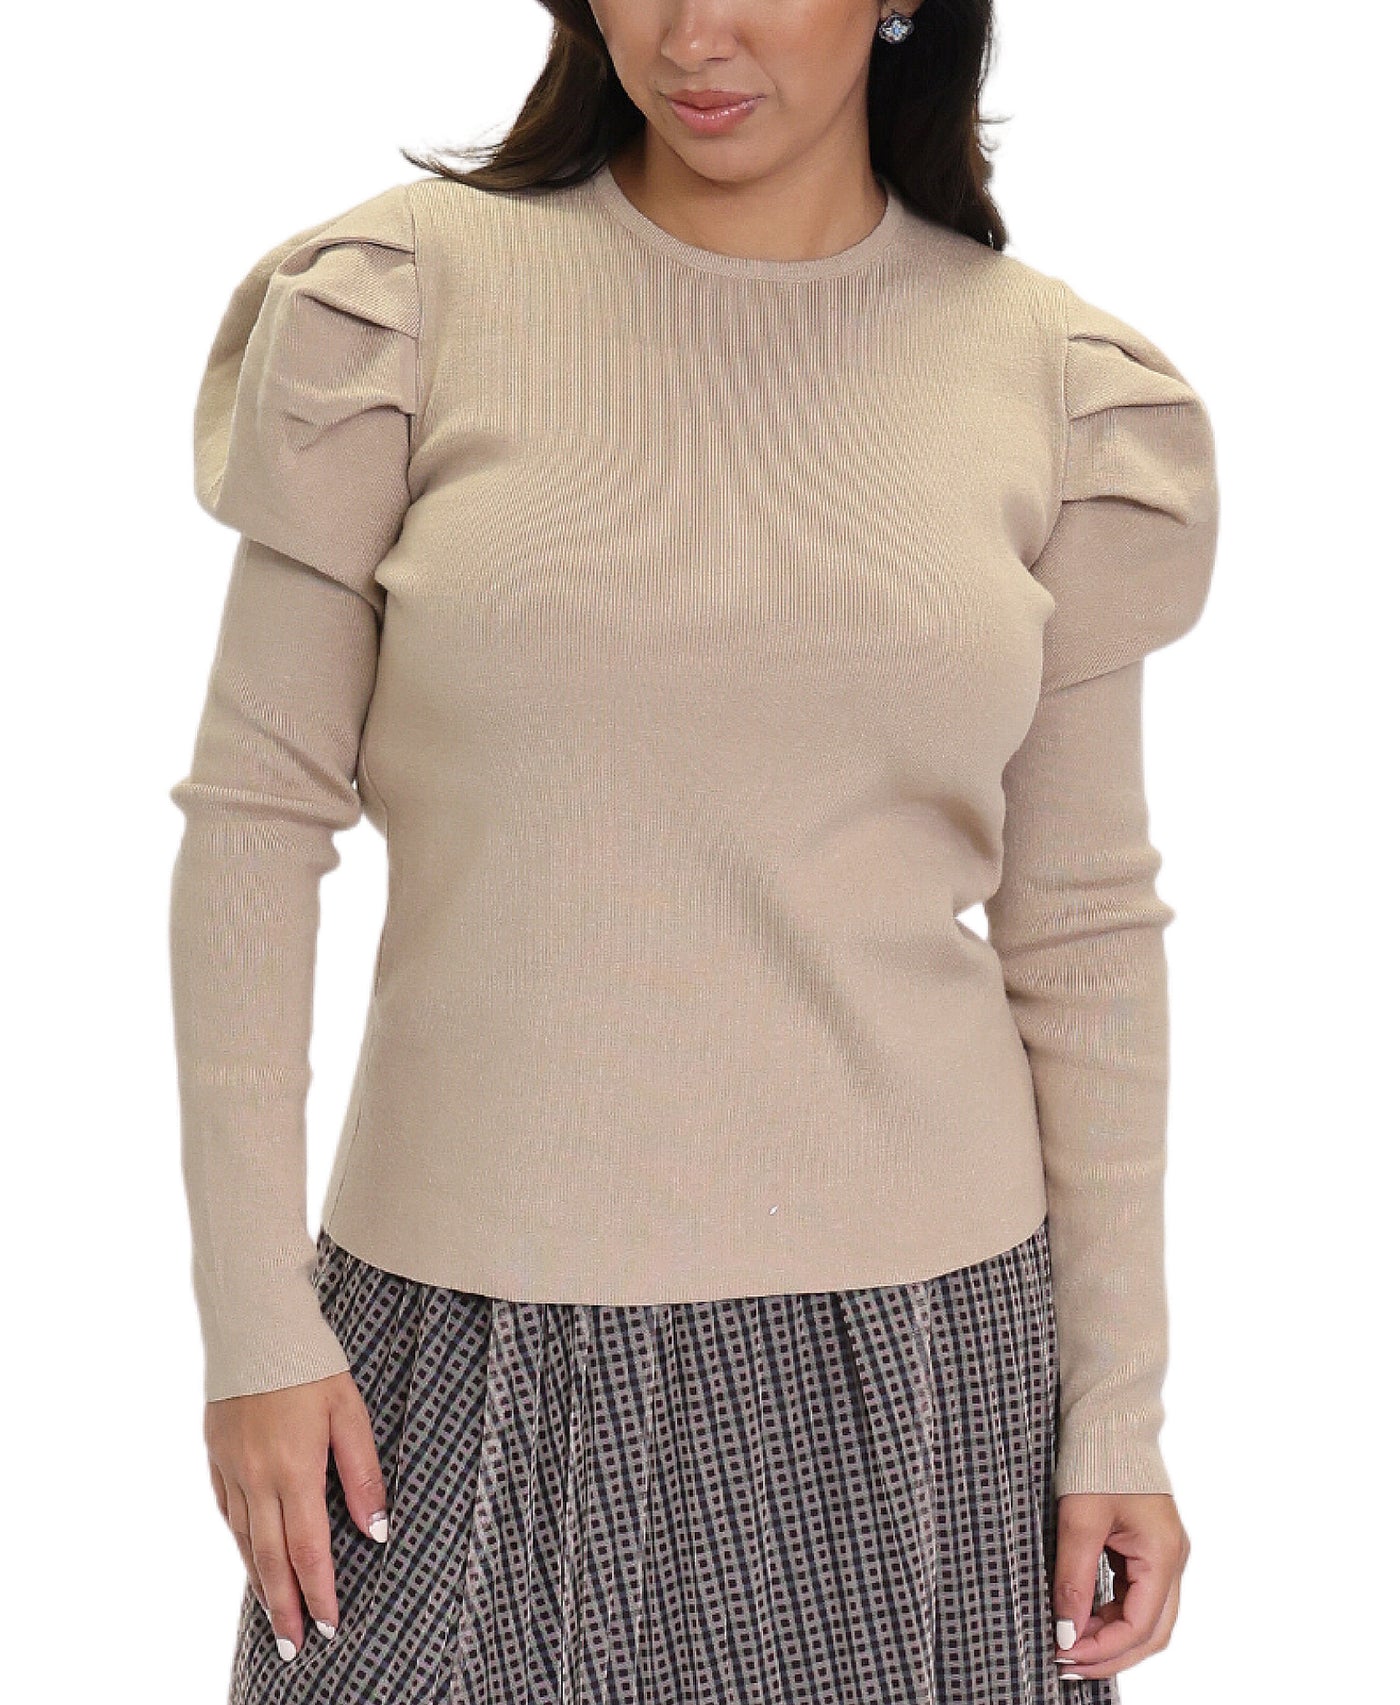 Sweater w/ Puff Sleeves image 1